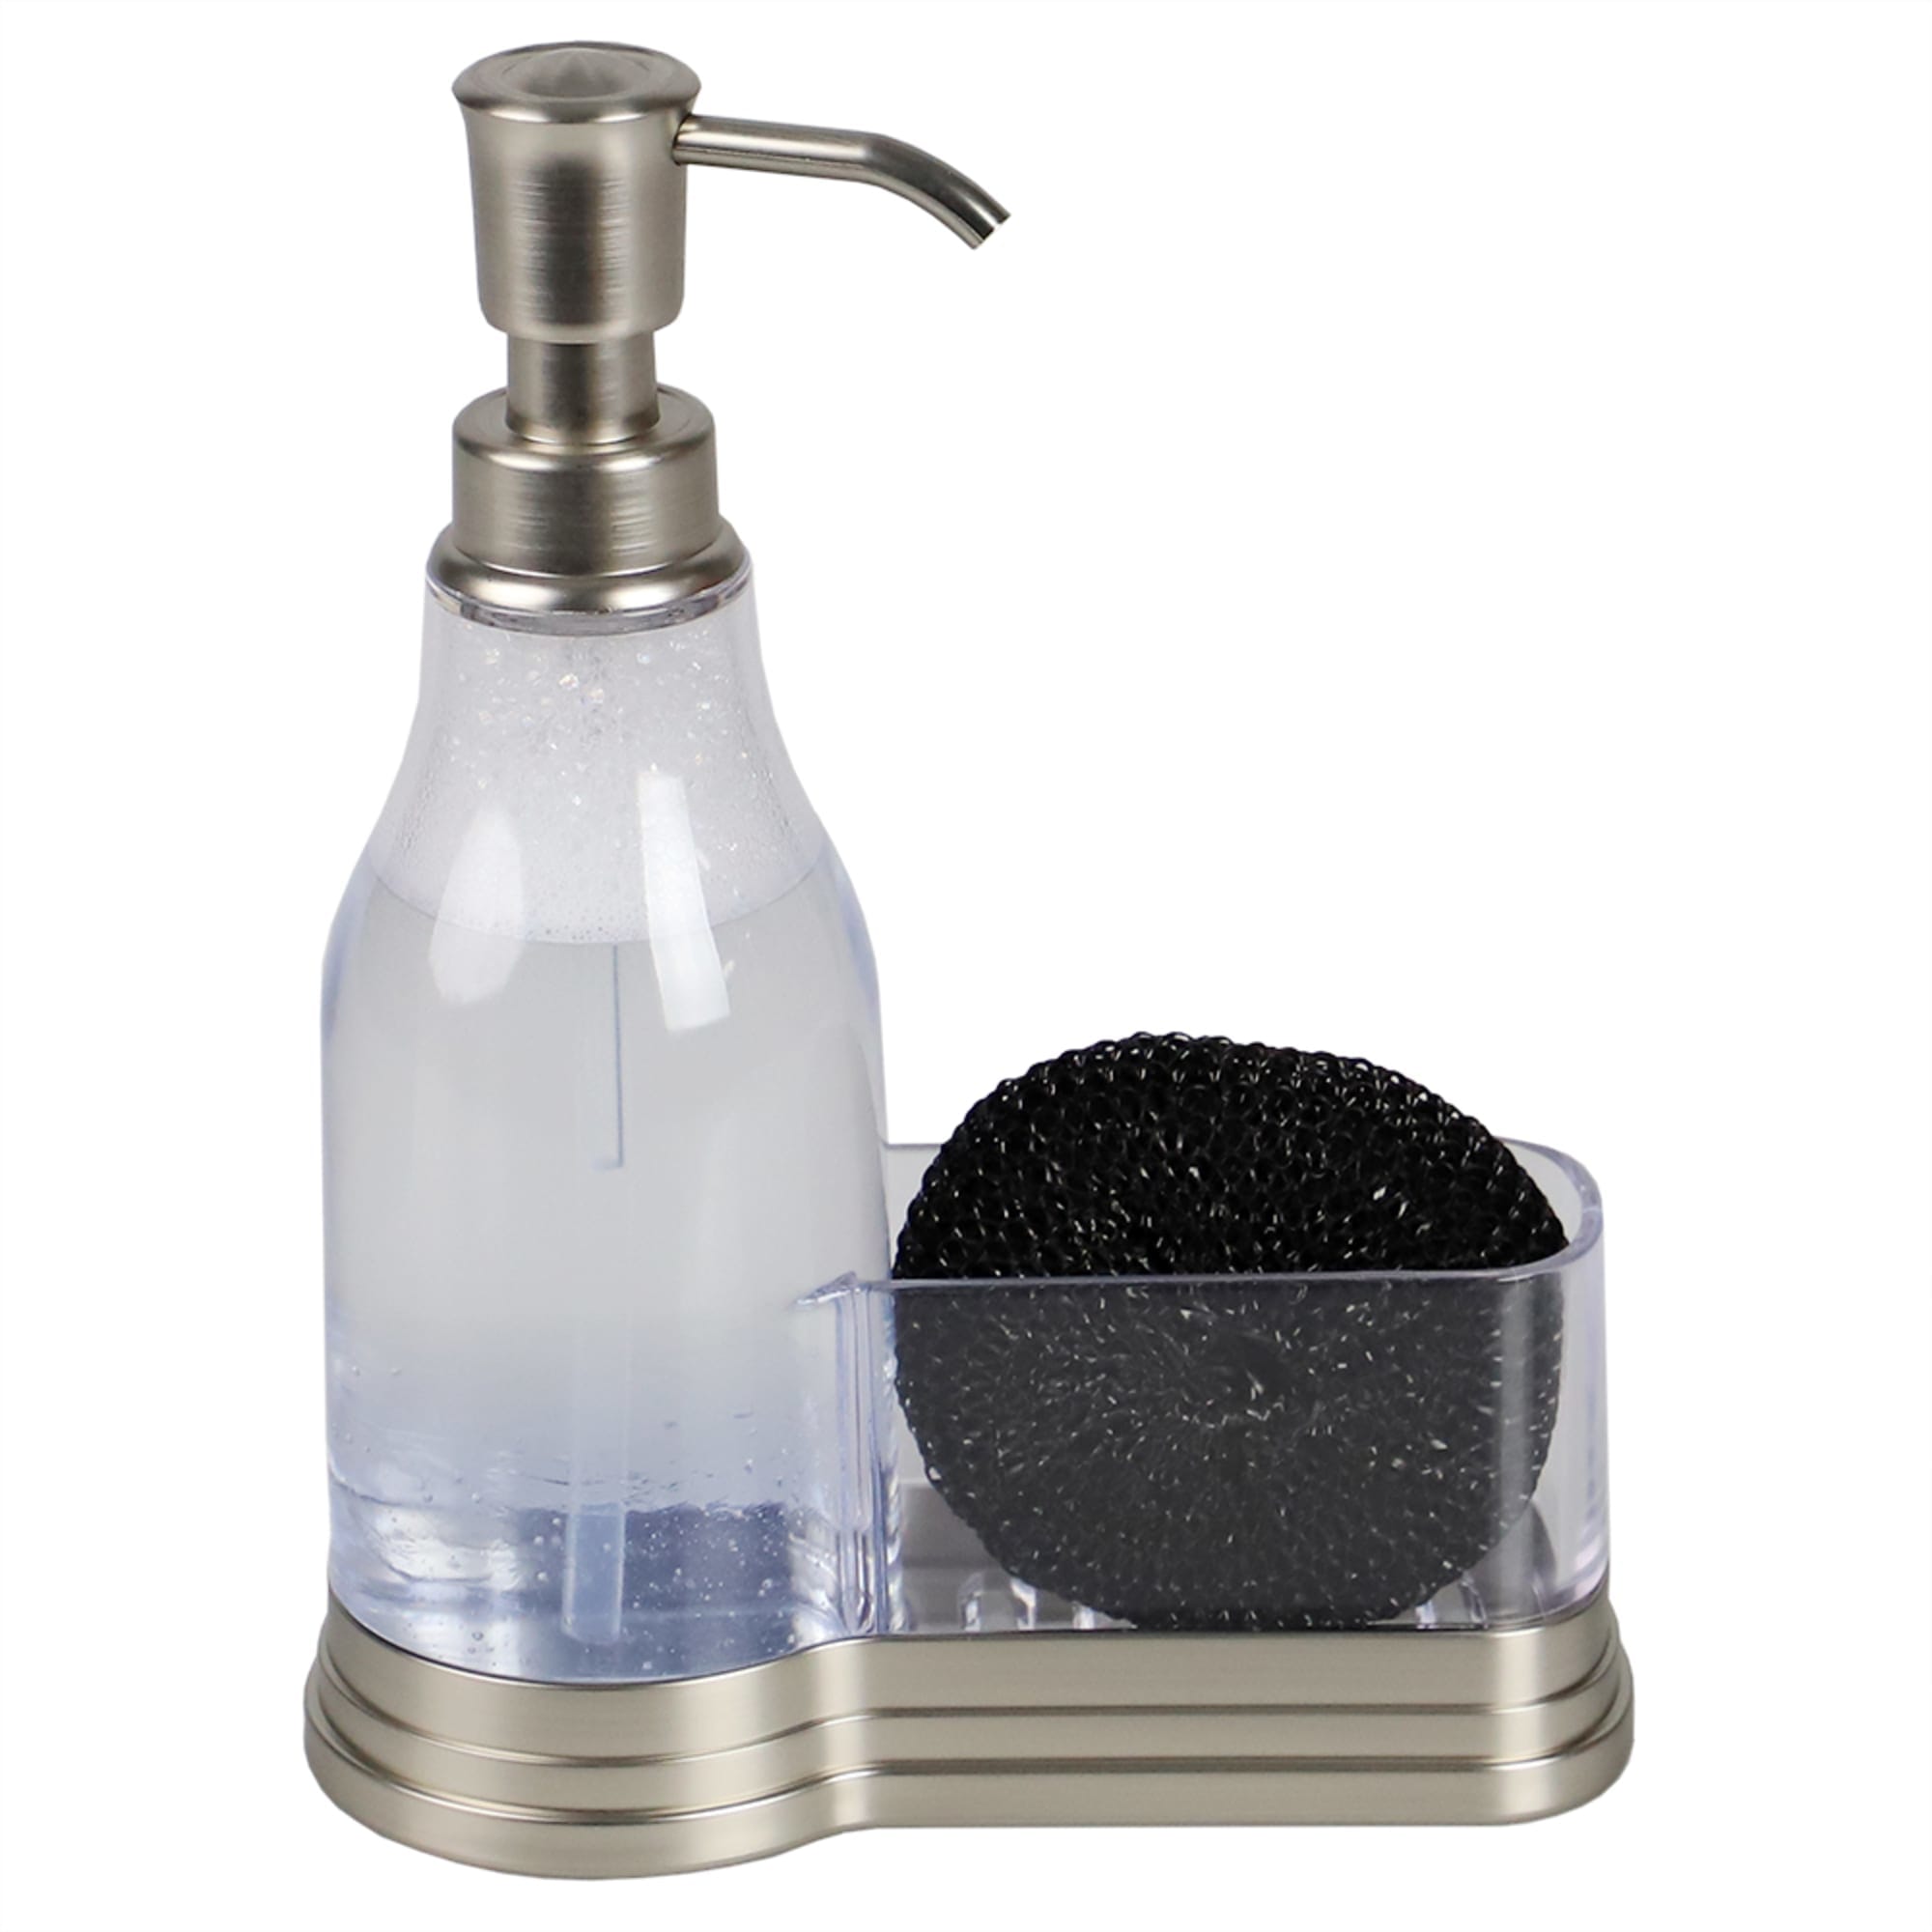 Home Basics Plastic Soap Dispenser with Brushed Steel Top and Fixed Sponge Holder, Chrome $6.00 EACH, CASE PACK OF 12